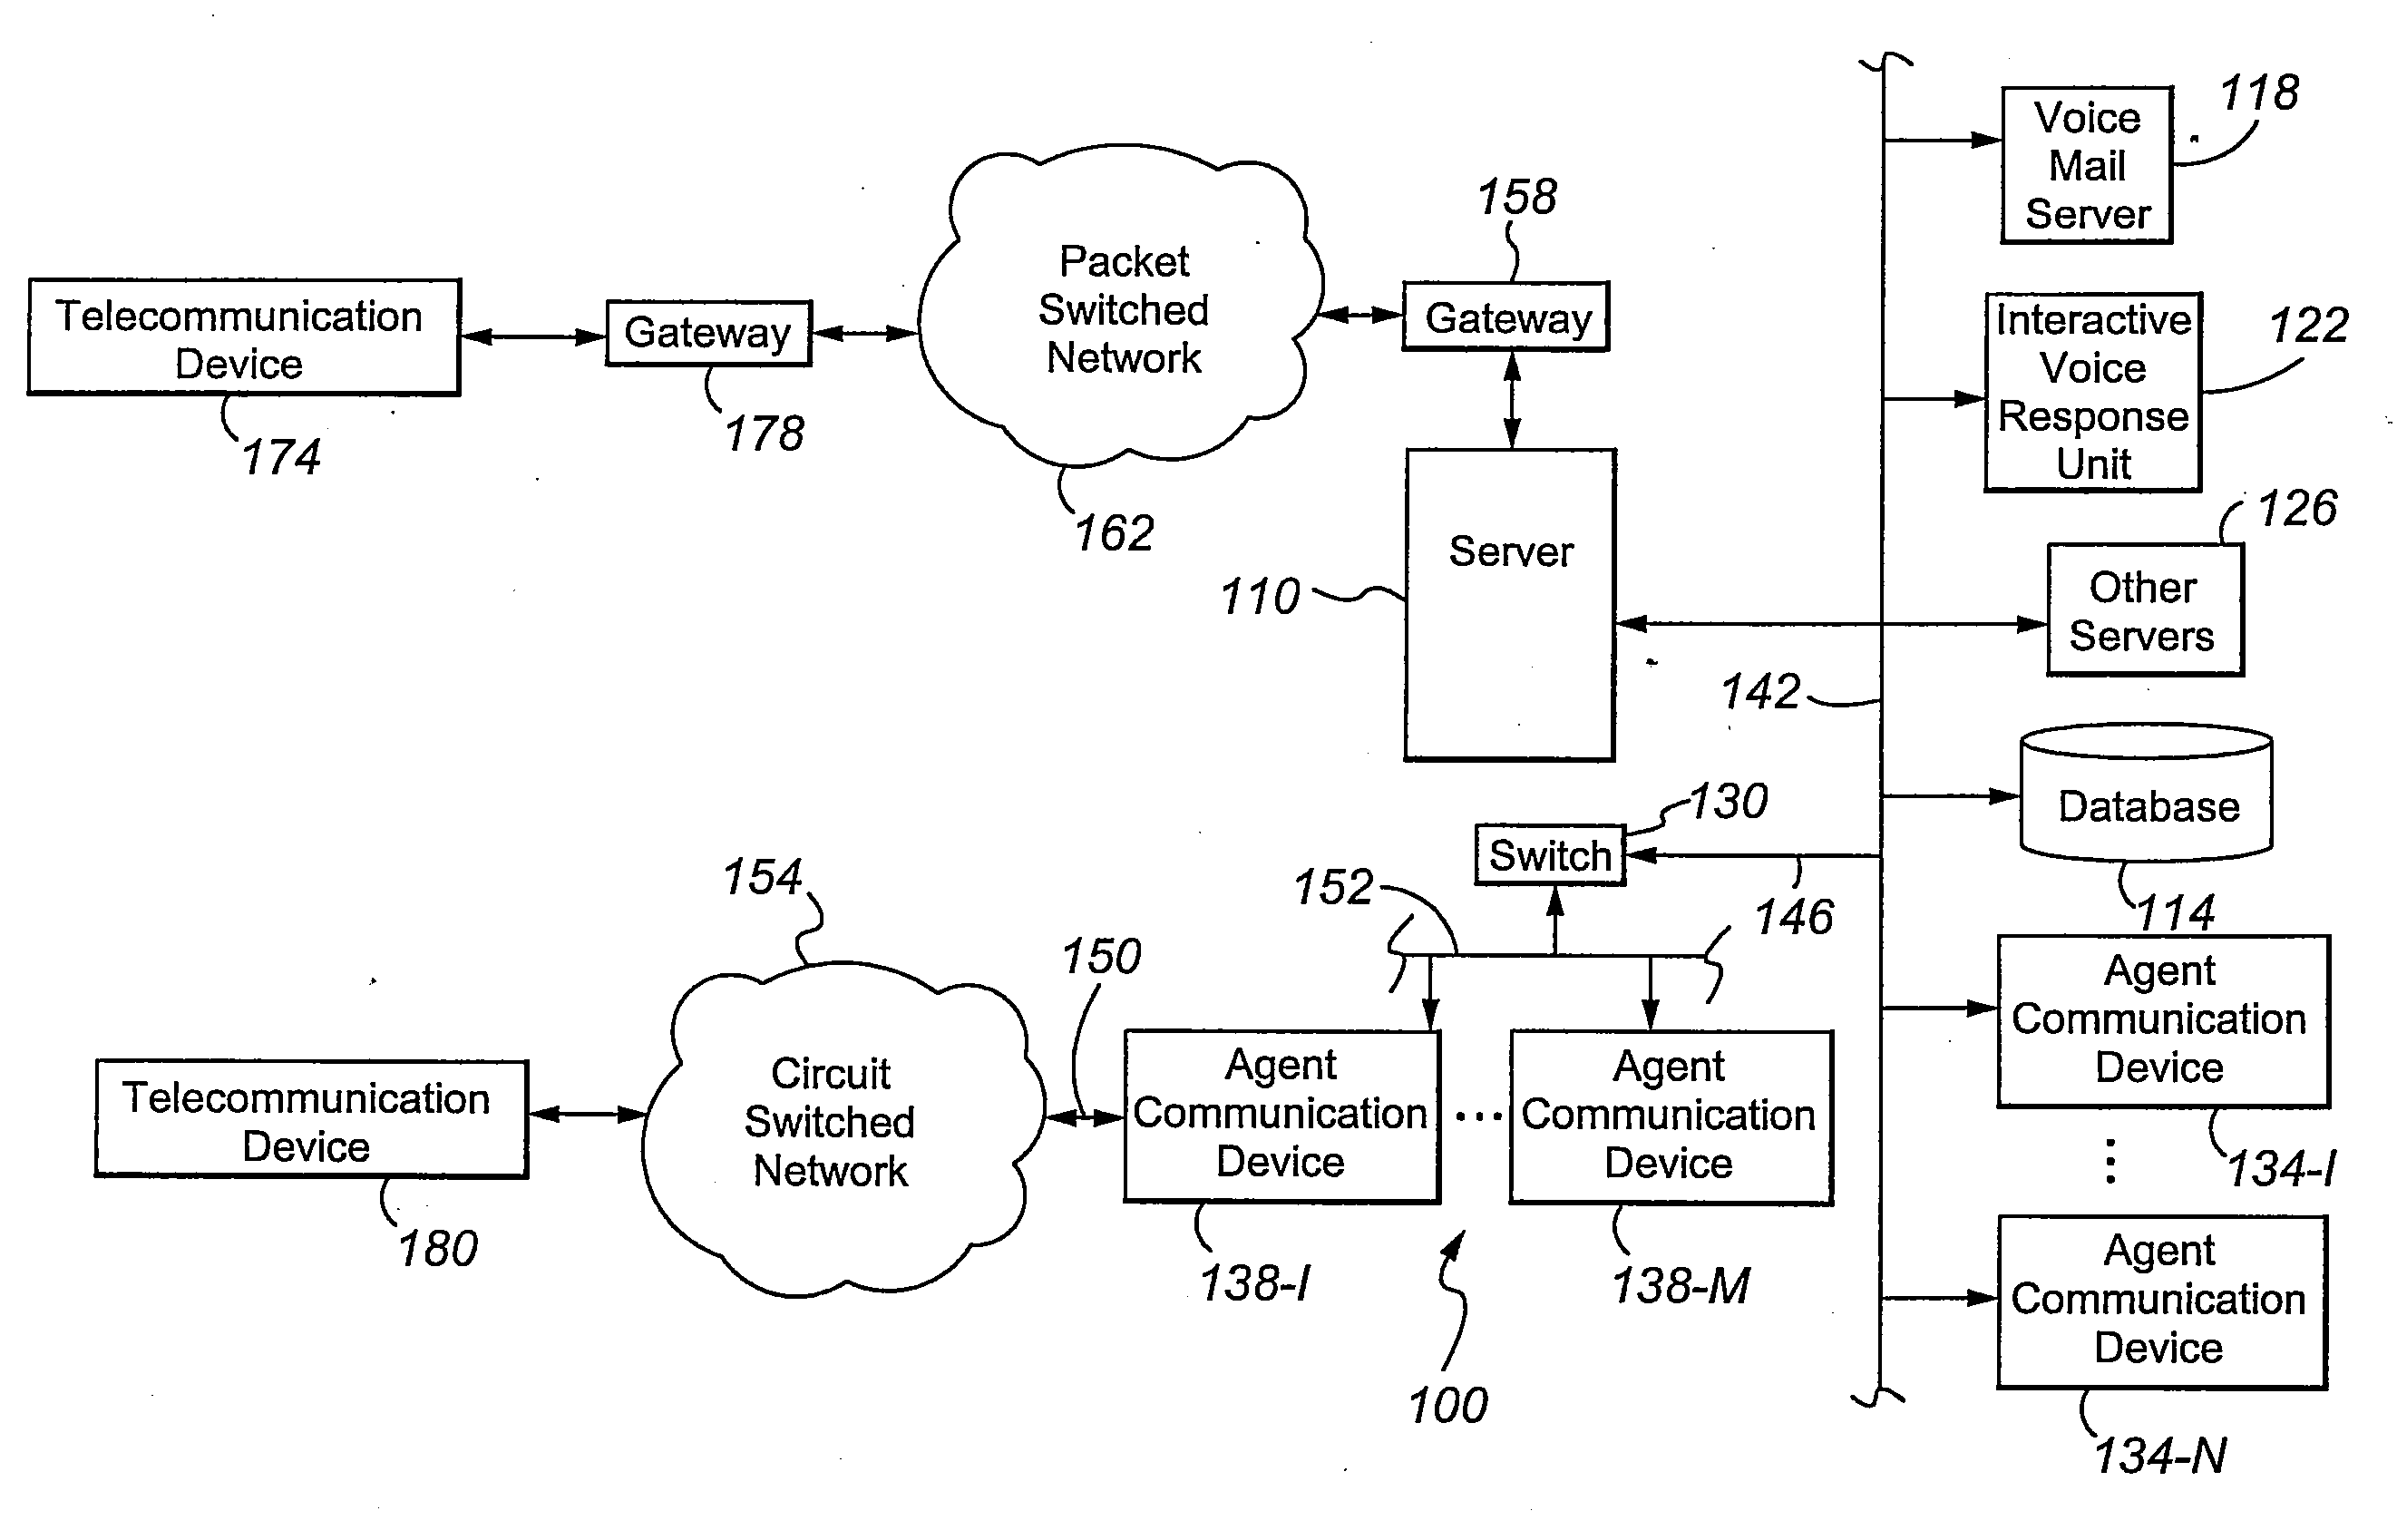 Deferred control of surrogate key generation in a distributed processing architecture